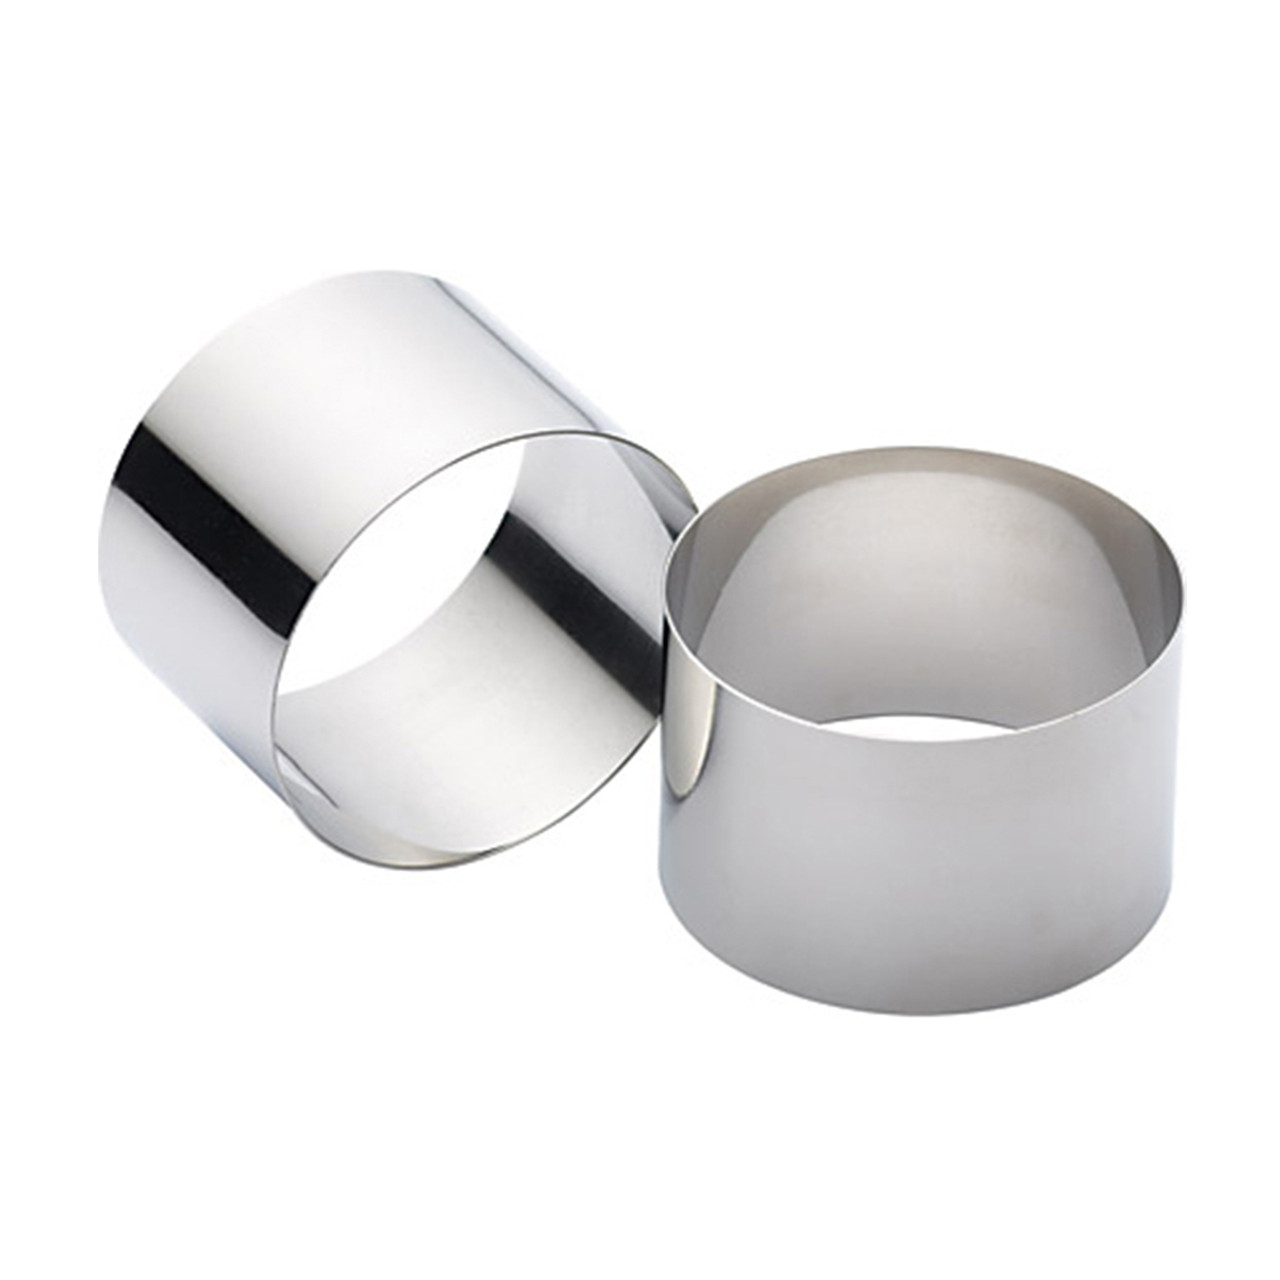 KitchenCraft Set of Two Stainless Steel Cooking Rings 7 x 3.5cm